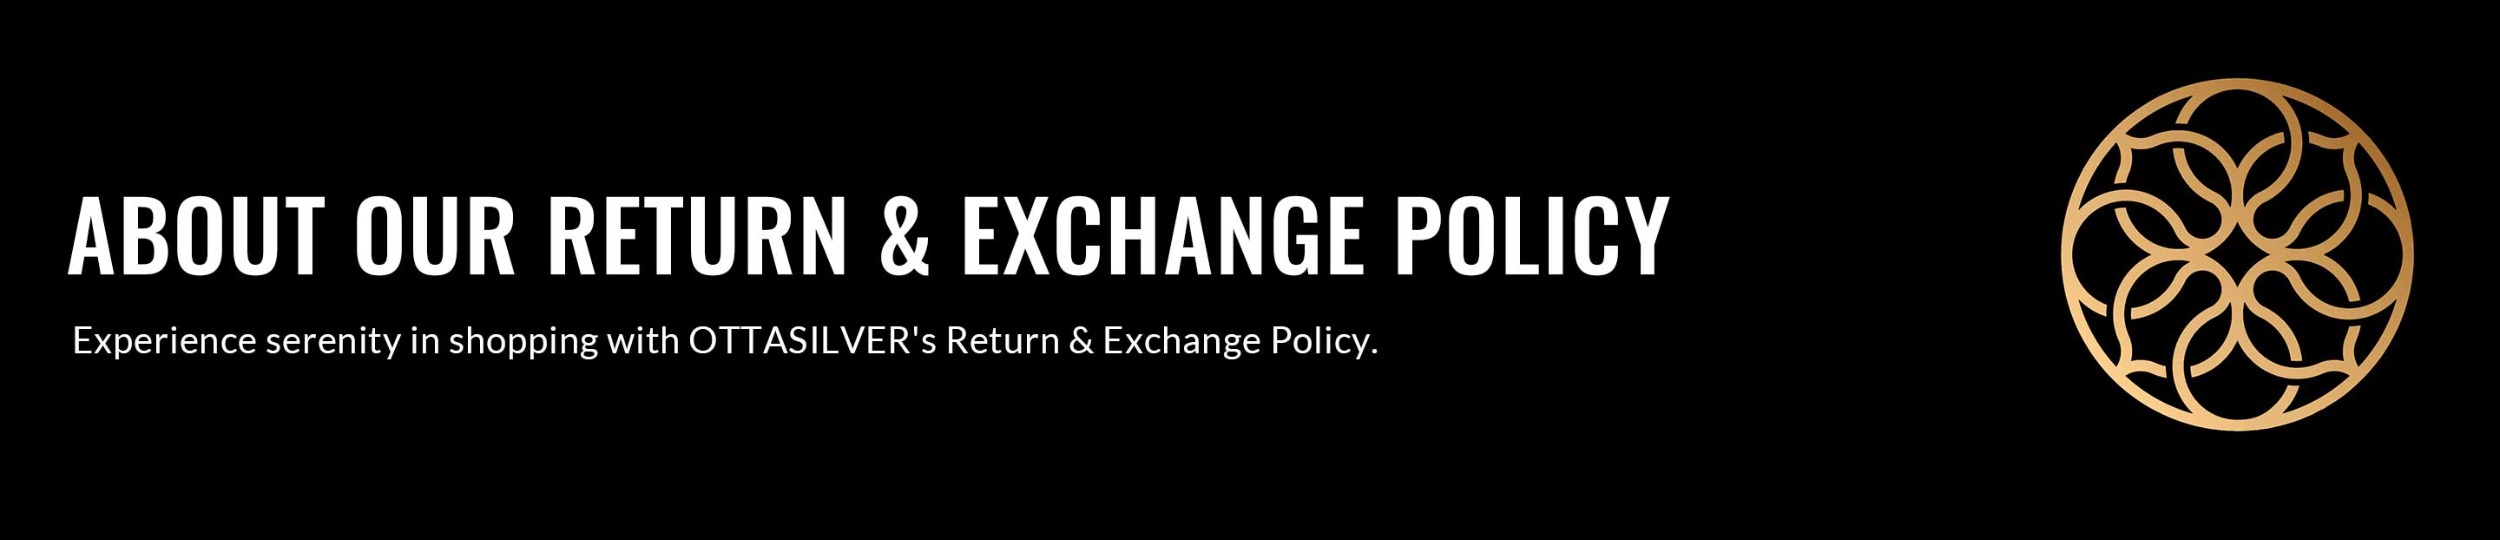 Return-Policy-Banner1